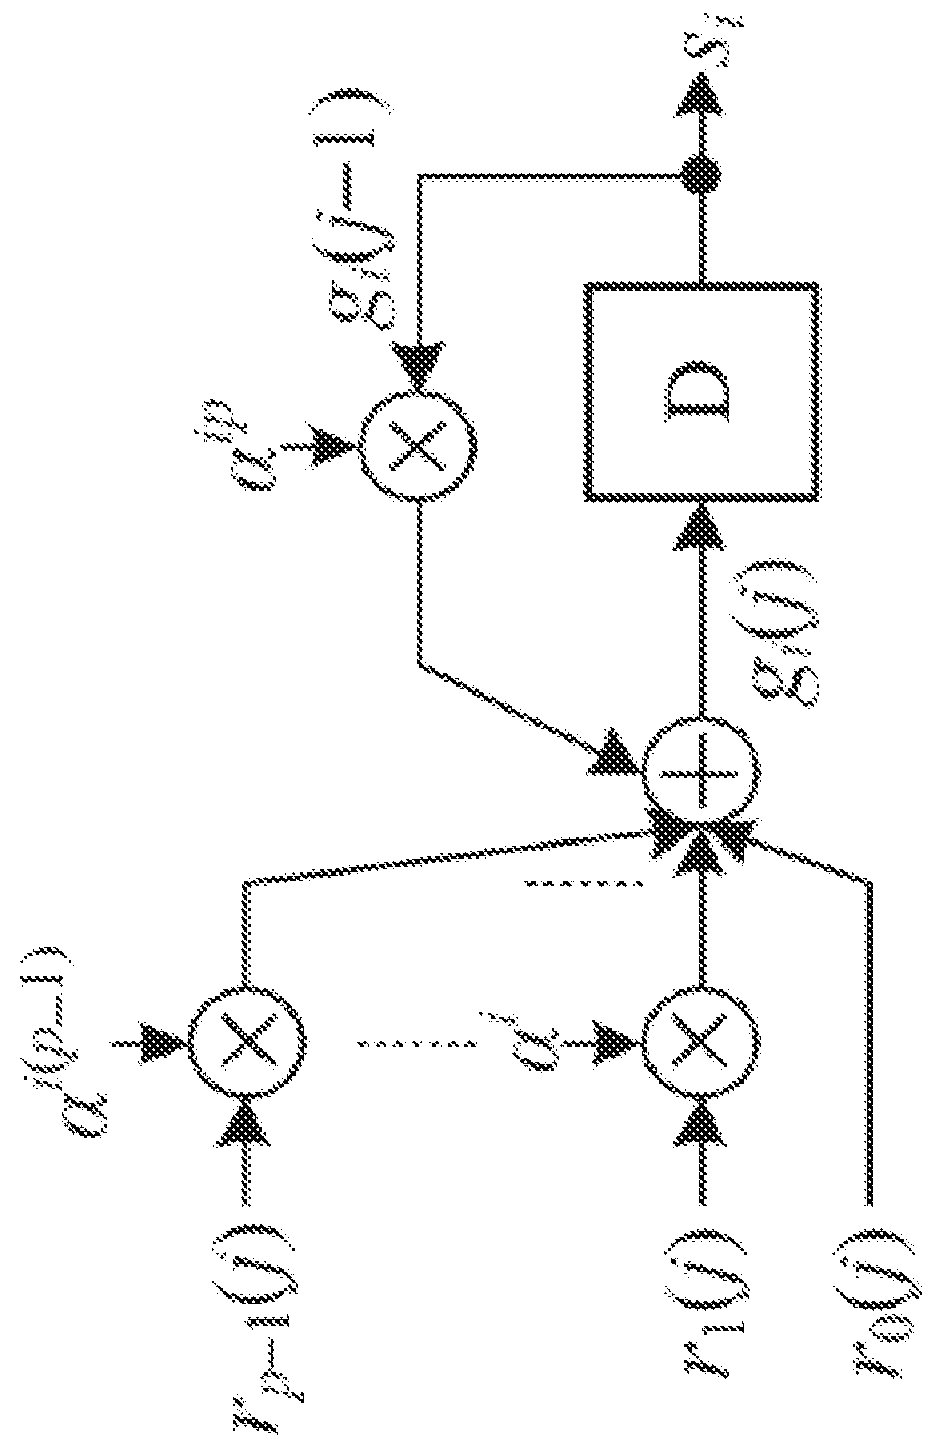 Encoding and syndrome computing co-design circuit for BCH code and method for deciding the same